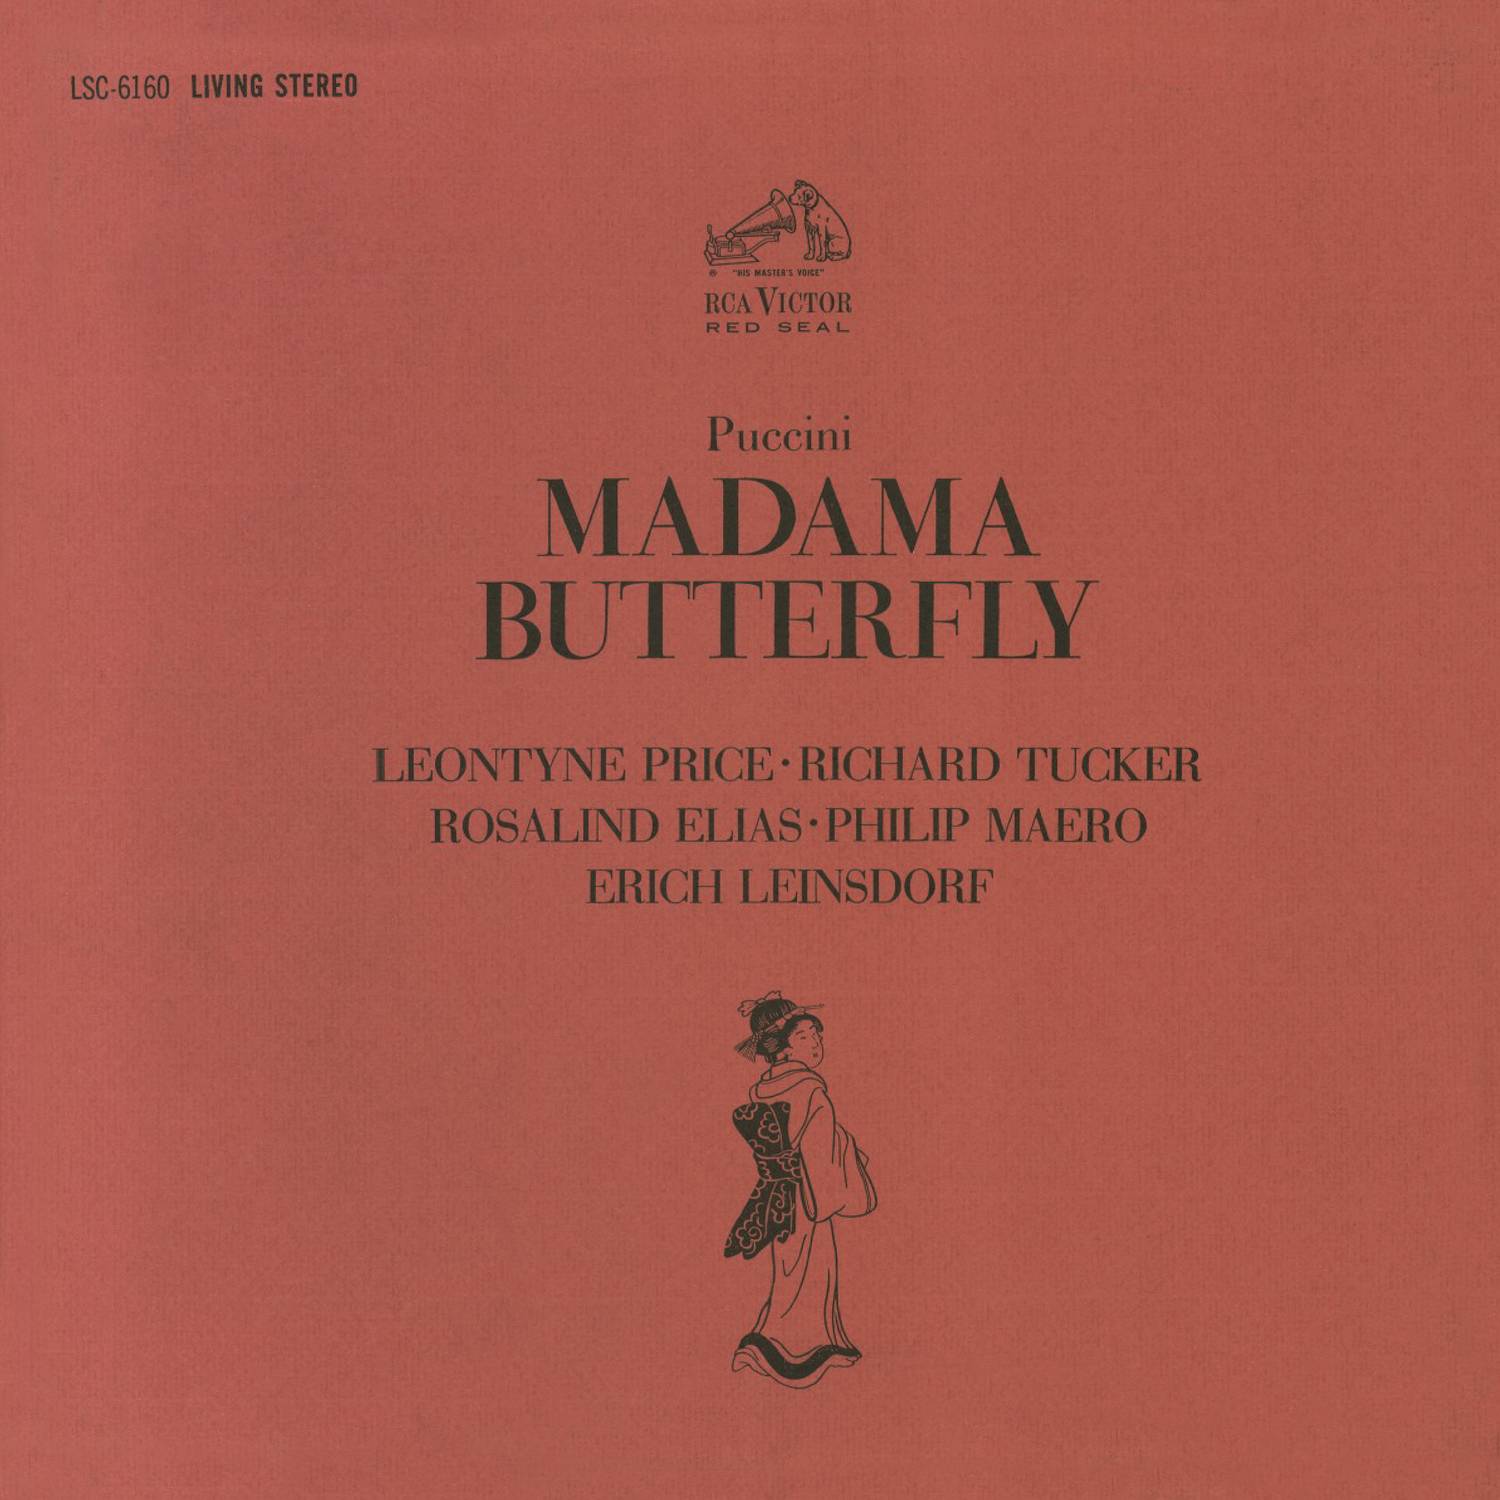 Madama Butterfly (Remastered): Act I - Ancora un passo or via (Butterfly's Entrance)